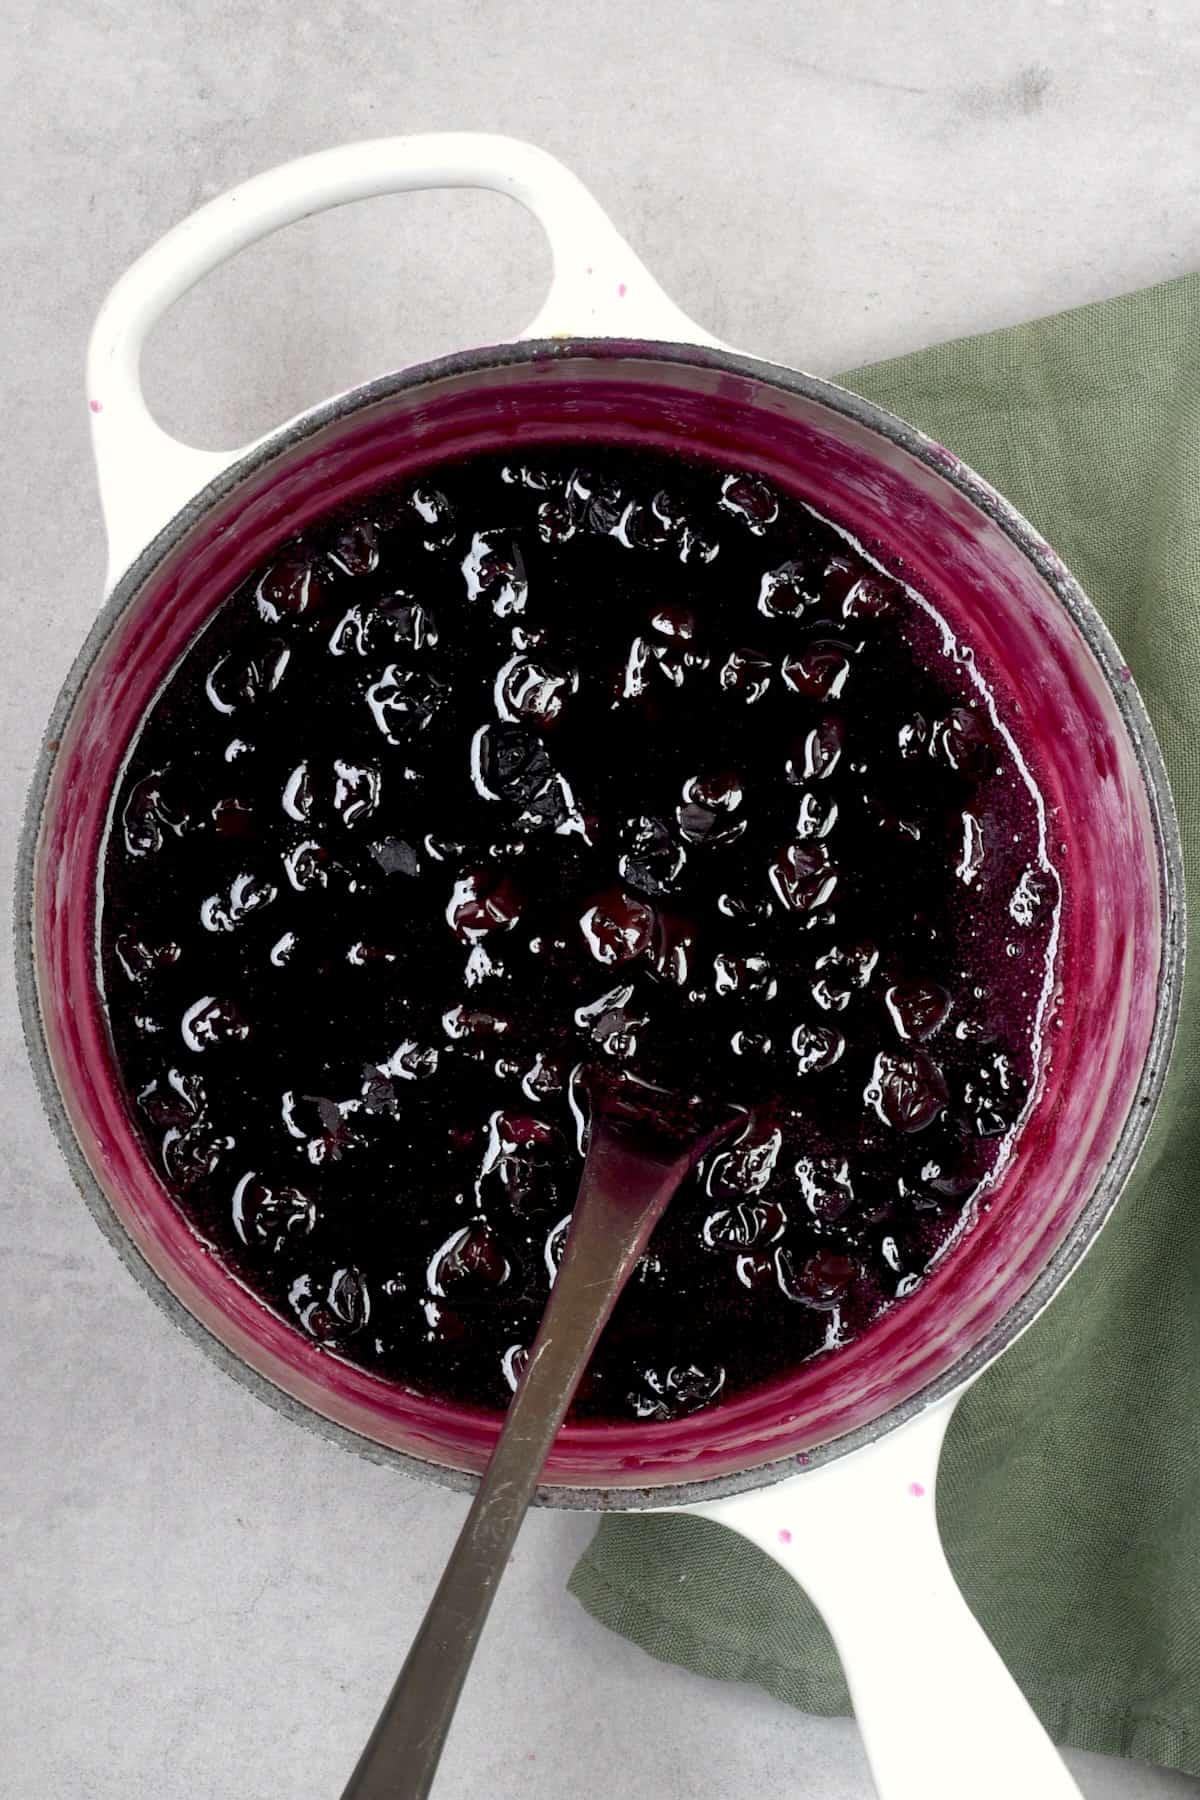 Homemade blueberry syrup in a saucepan